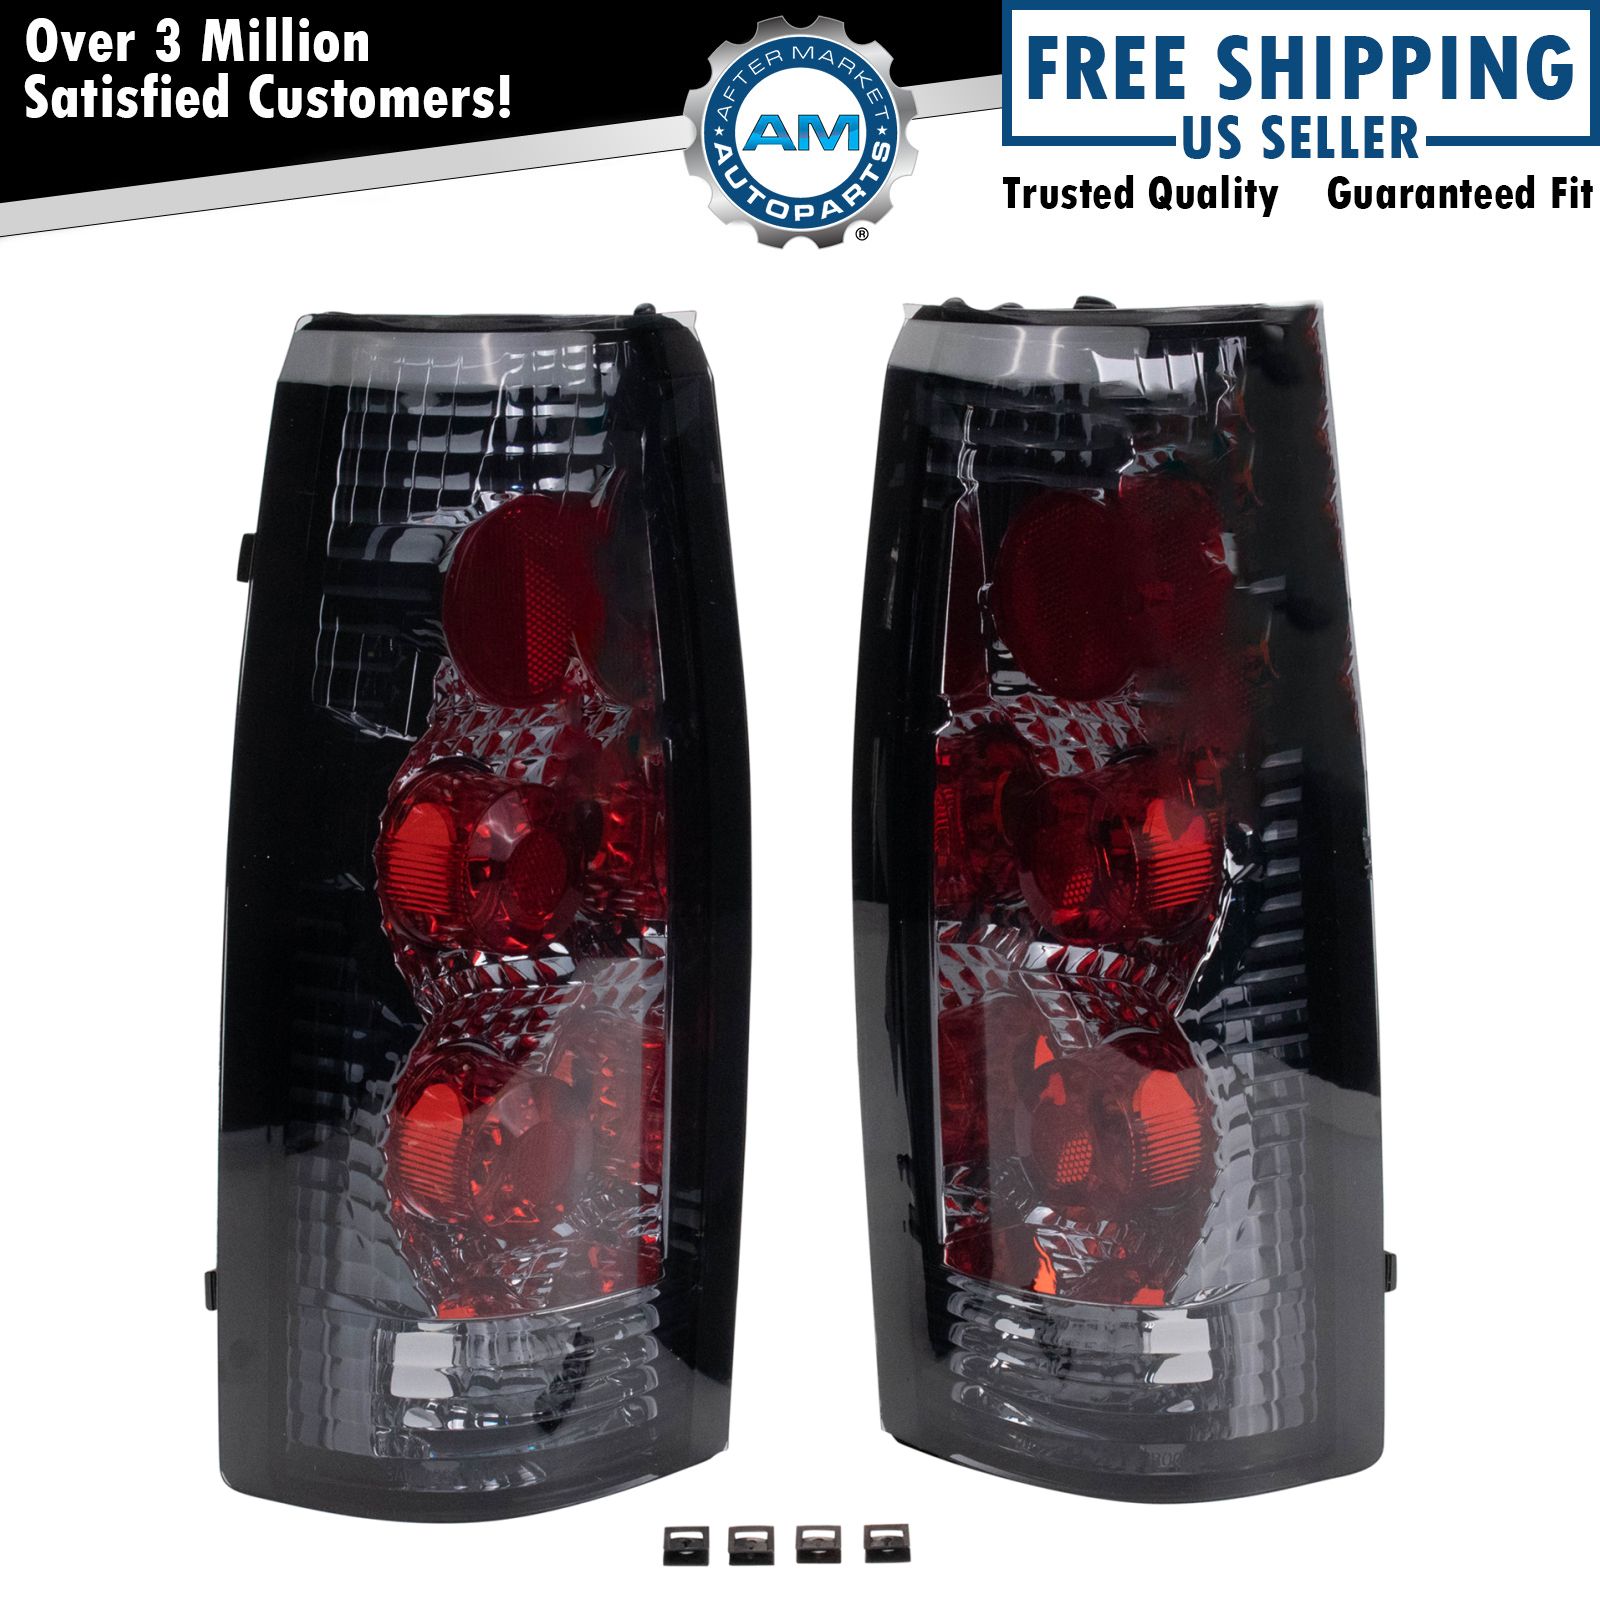 2pc Rear Altezza Tail Light Set LH & RH Pair for Chevy GMC Cadillac Truck SUV